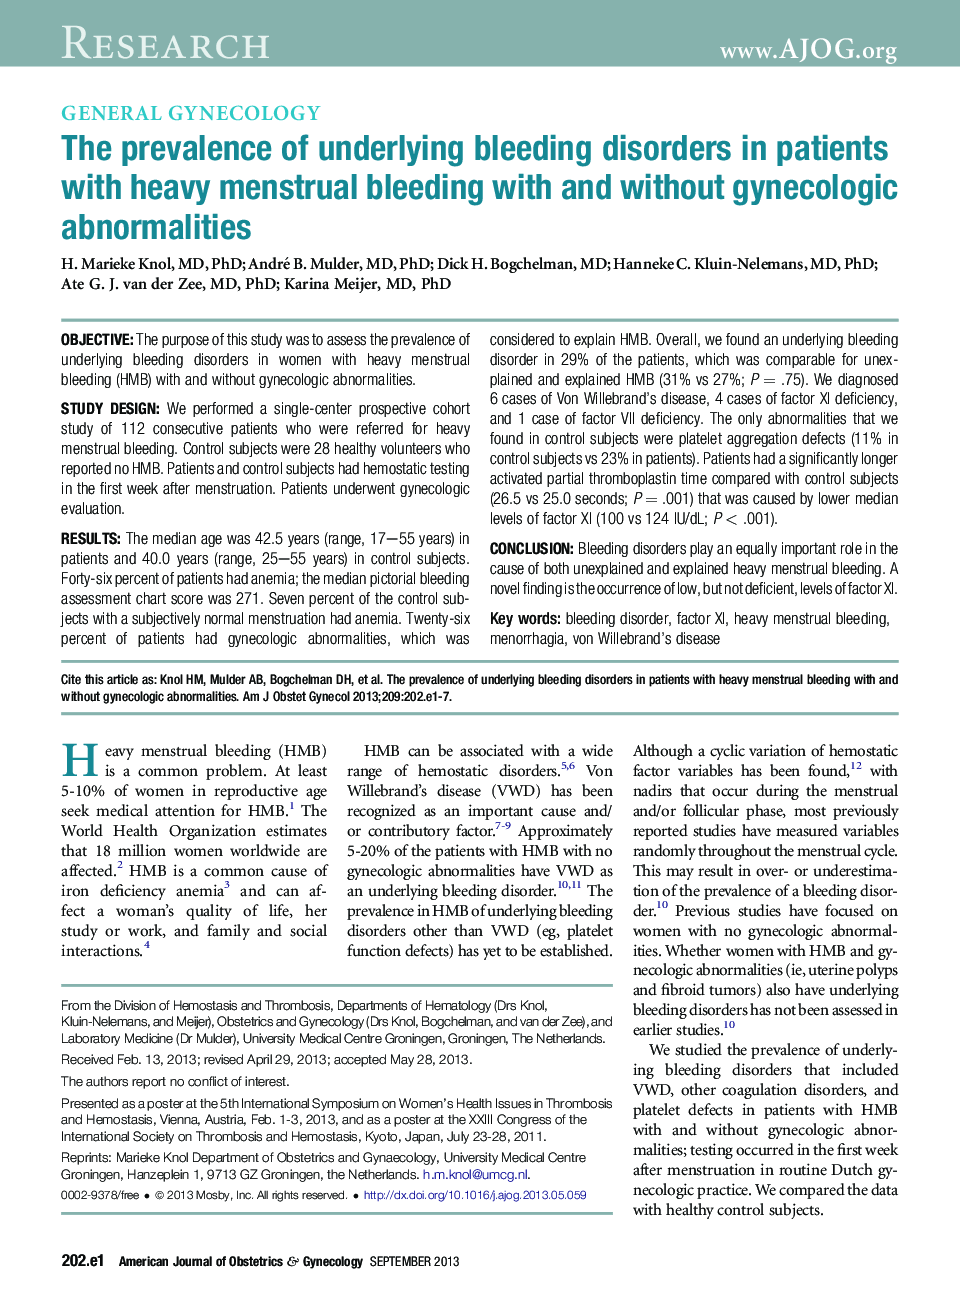 The prevalence of underlying bleeding disorders in patients with heavy menstrual bleeding with and without gynecologic abnormalities